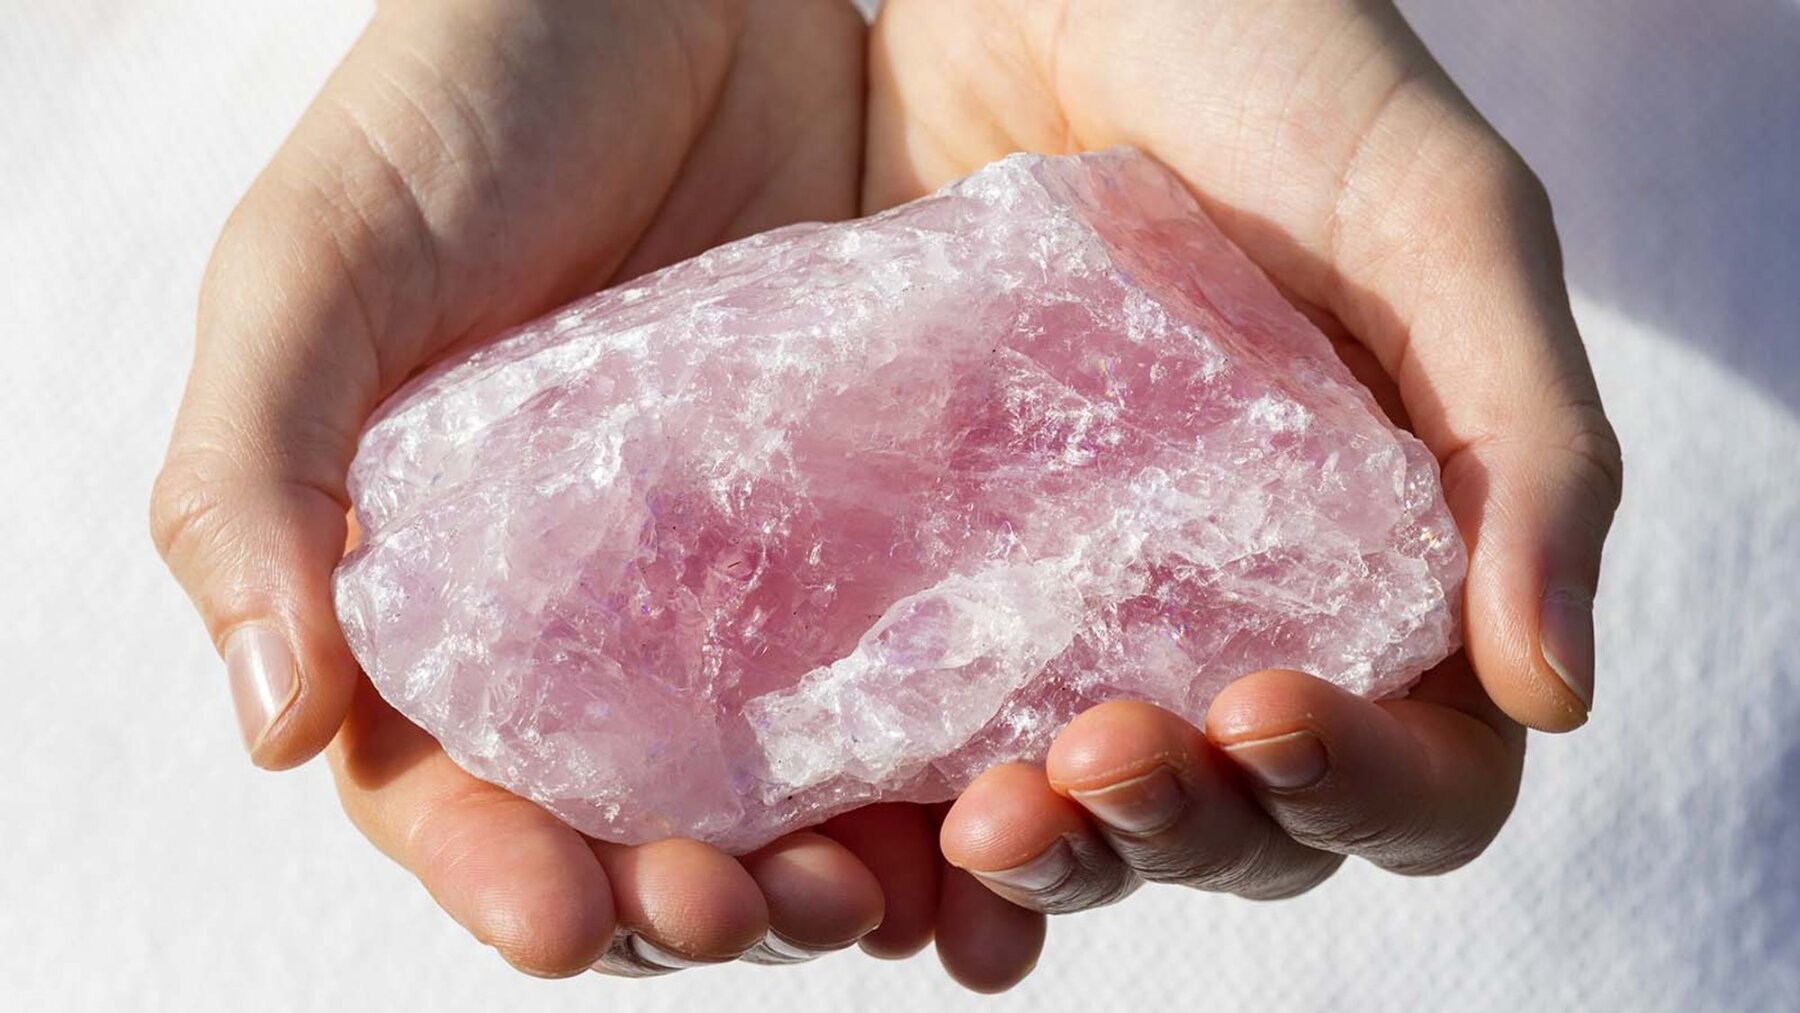 How to Meditate with Healing Crystals